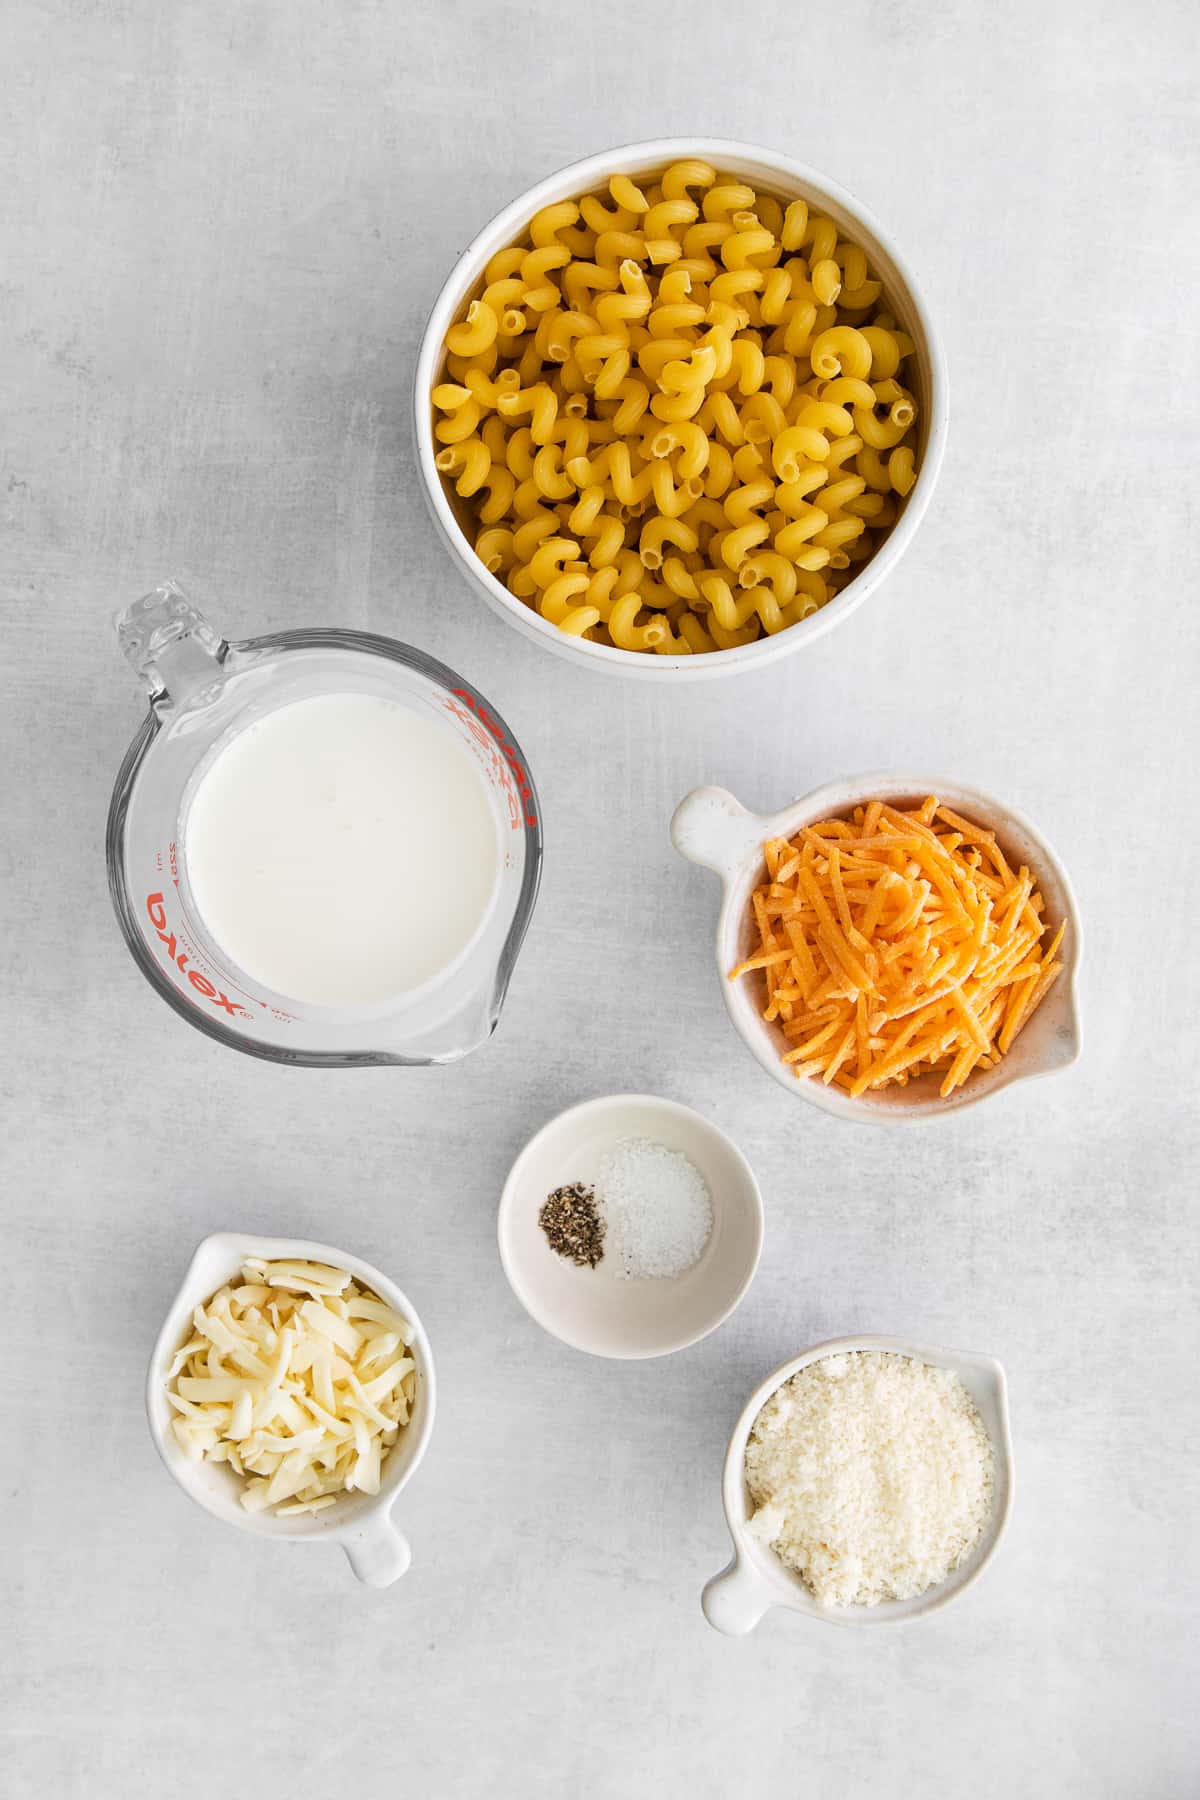 Ingredients for easy cheese pasta in bowls.